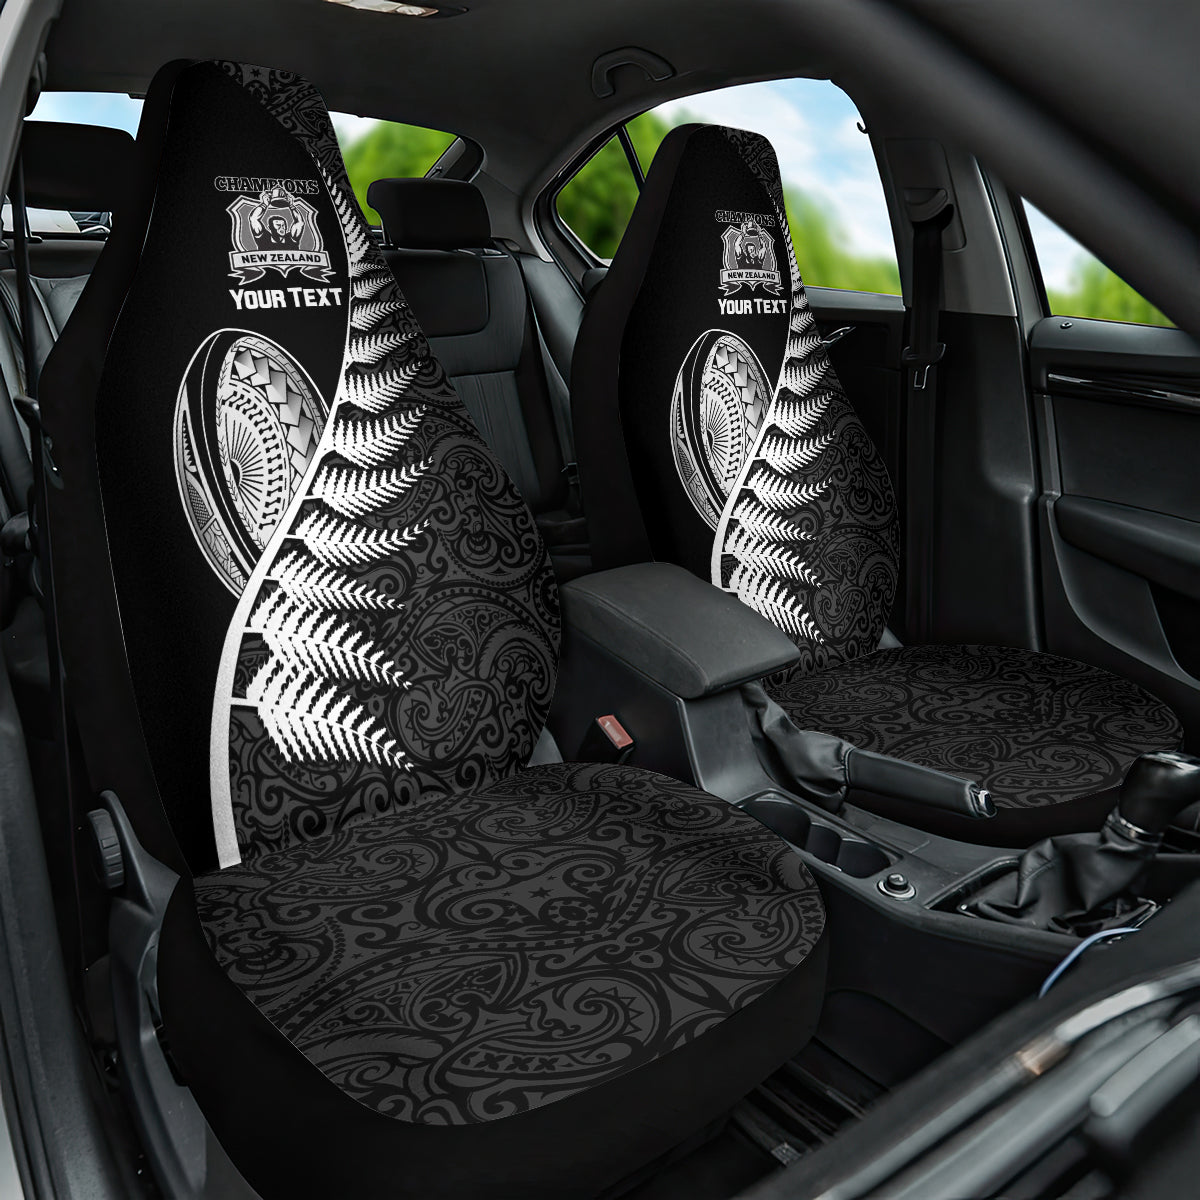 Custom New Zealand World Cup 2023 Car Seat Cover Aotearoa Champion Rugby with Silver Fern Maori Ethnic Pattern LT03 One Size Black - Polynesian Pride